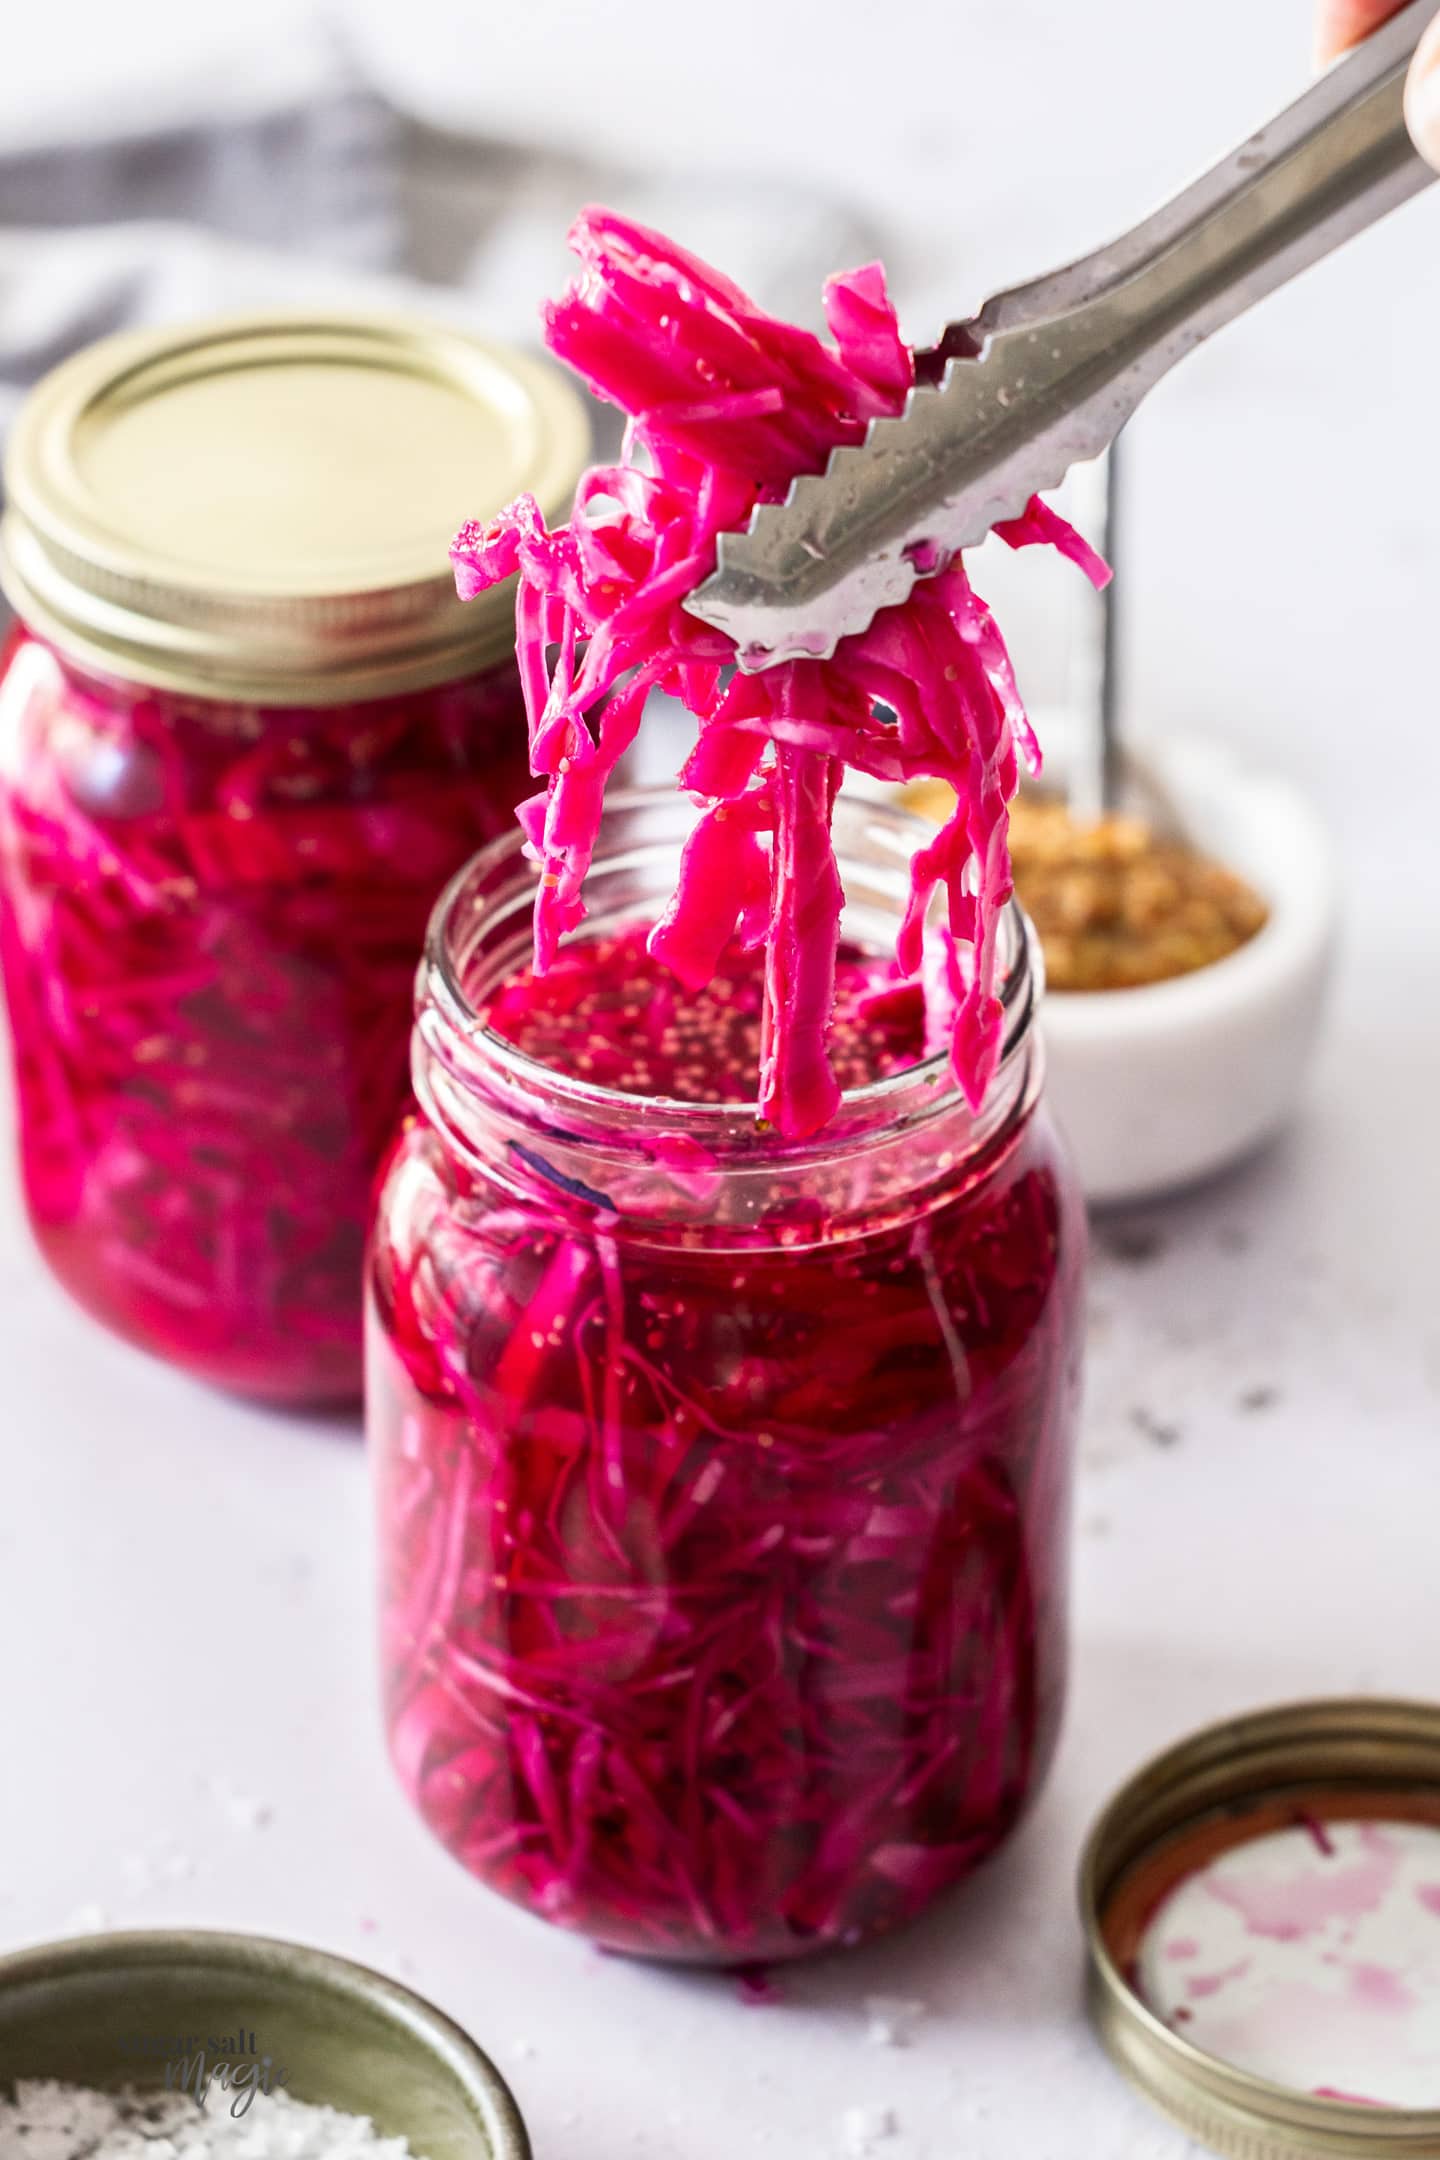 Tongs taking pickled red cabbage out of a jar.